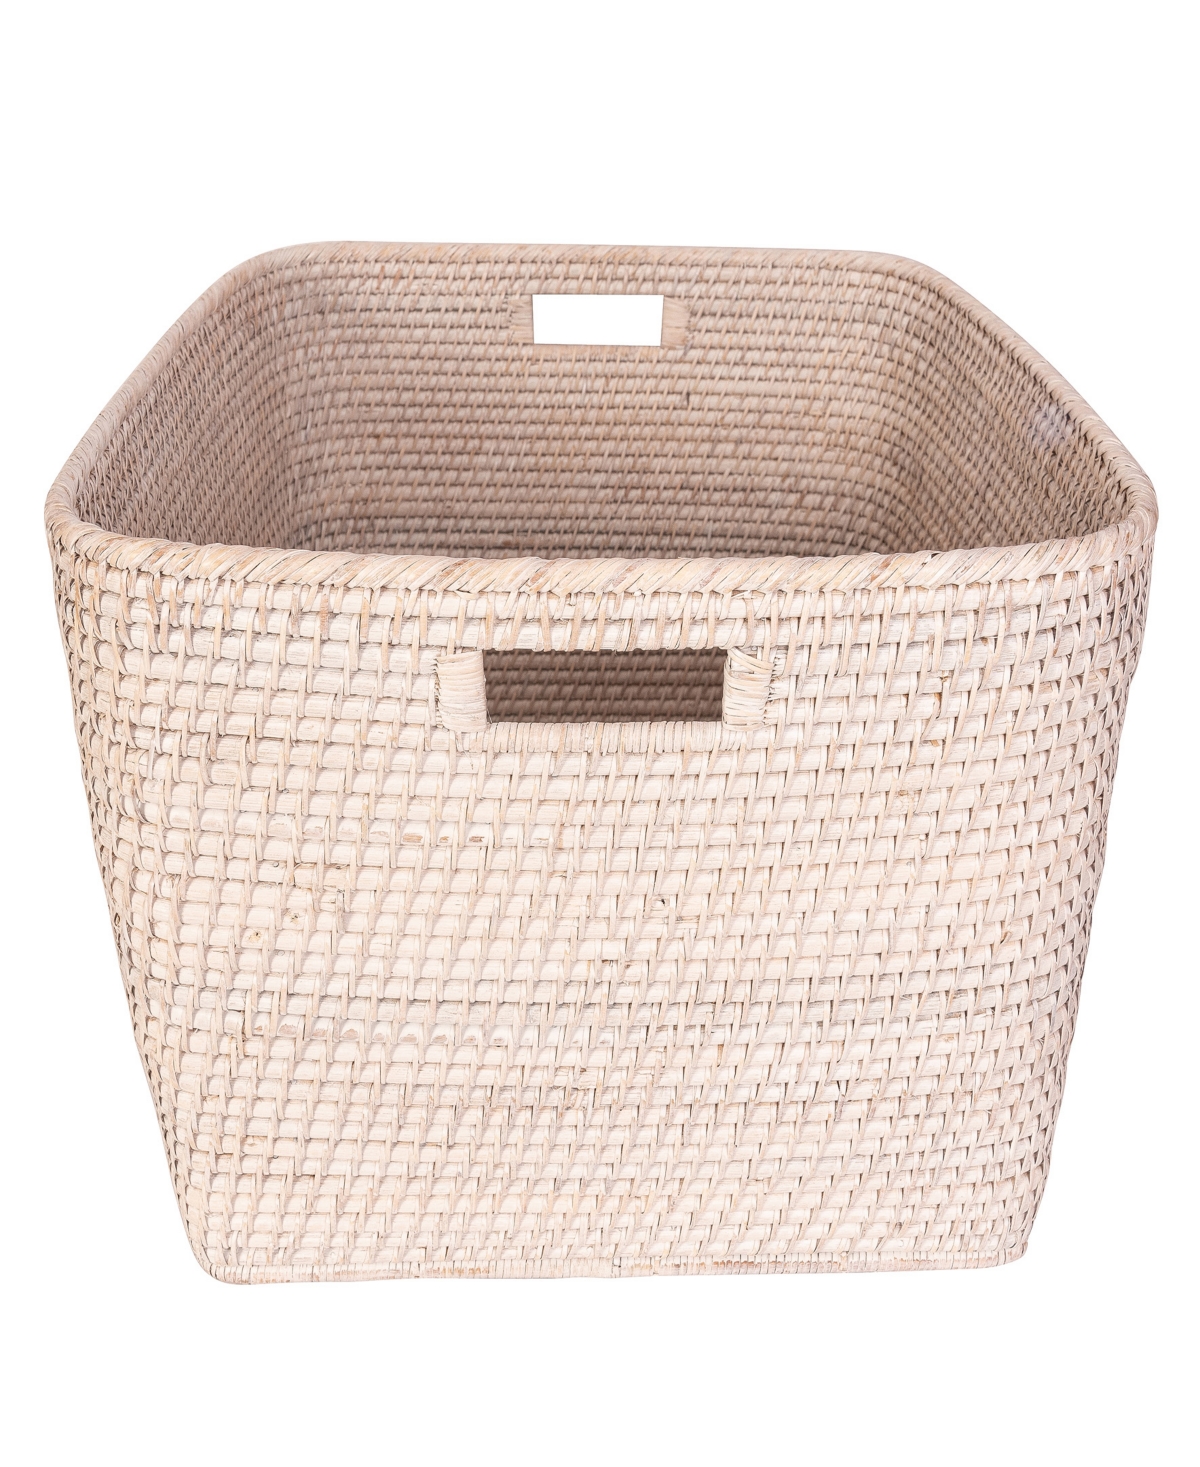 Shop Artifacts Trading Company Saboga Home Family Basket With Cutout Handle In White Wash